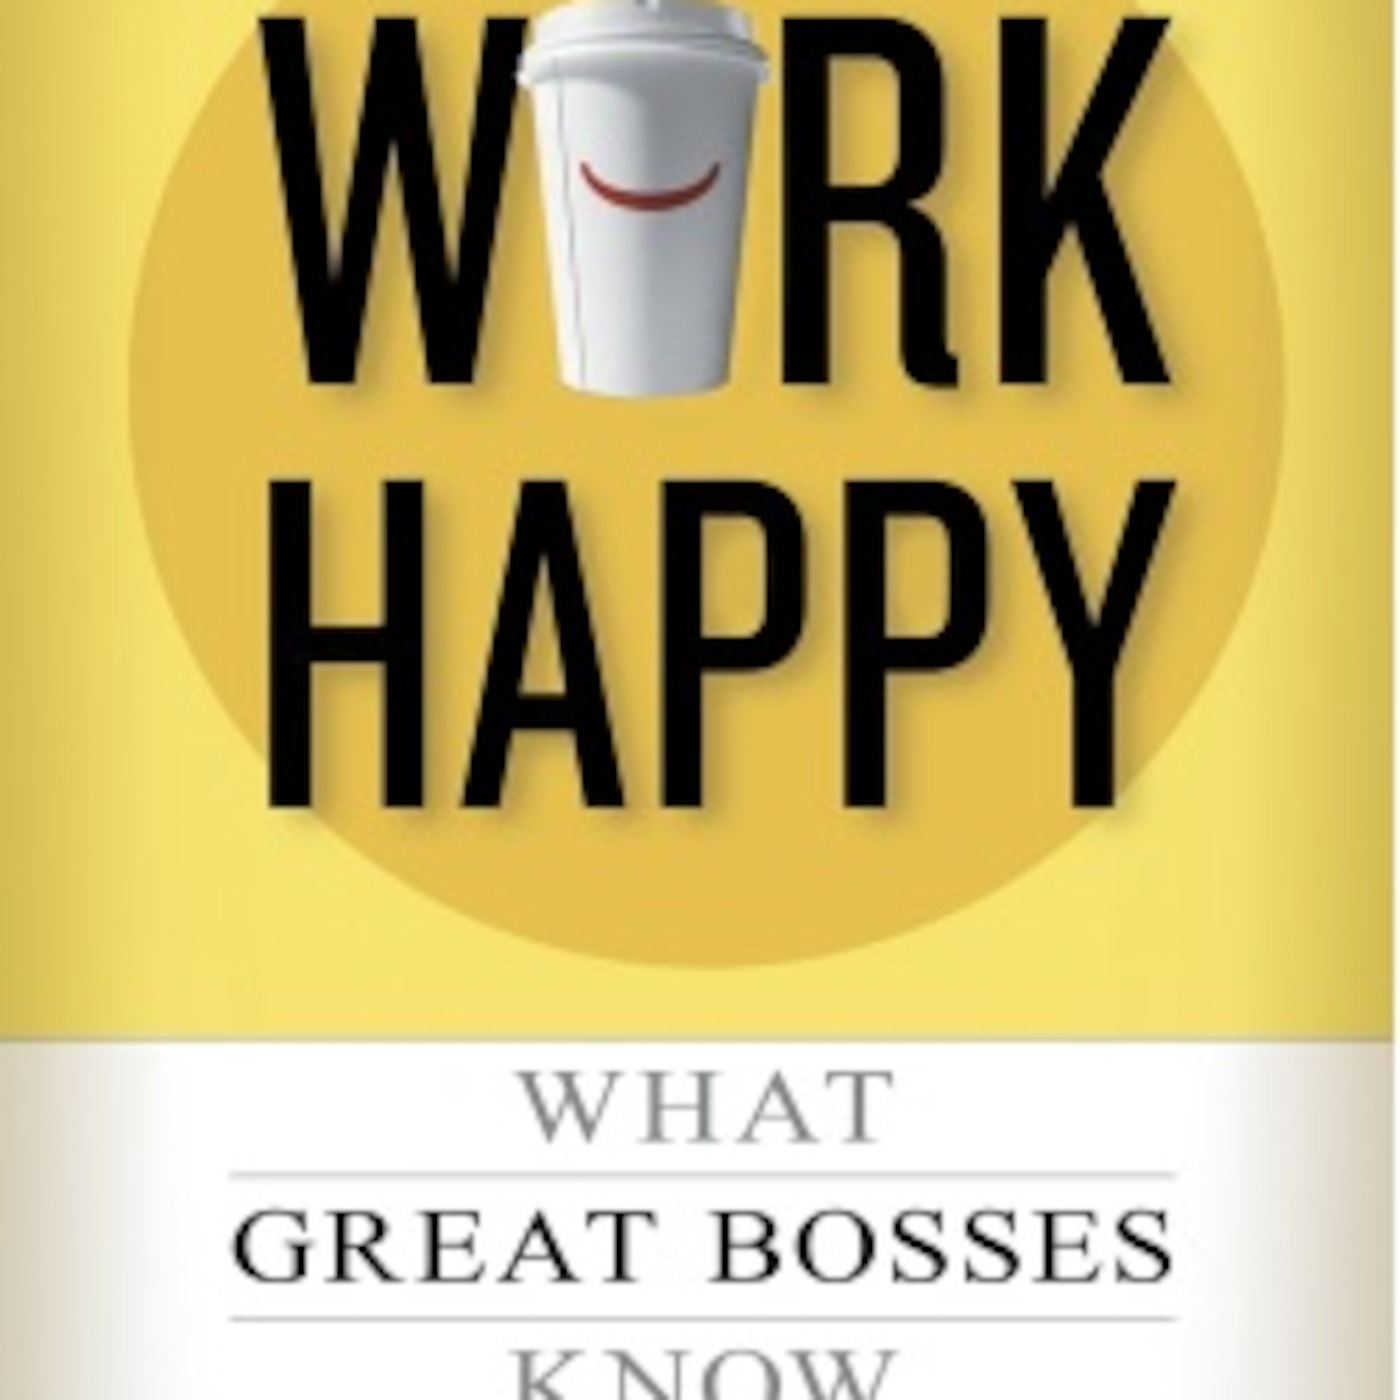 Work Happy in a Bad Economy?